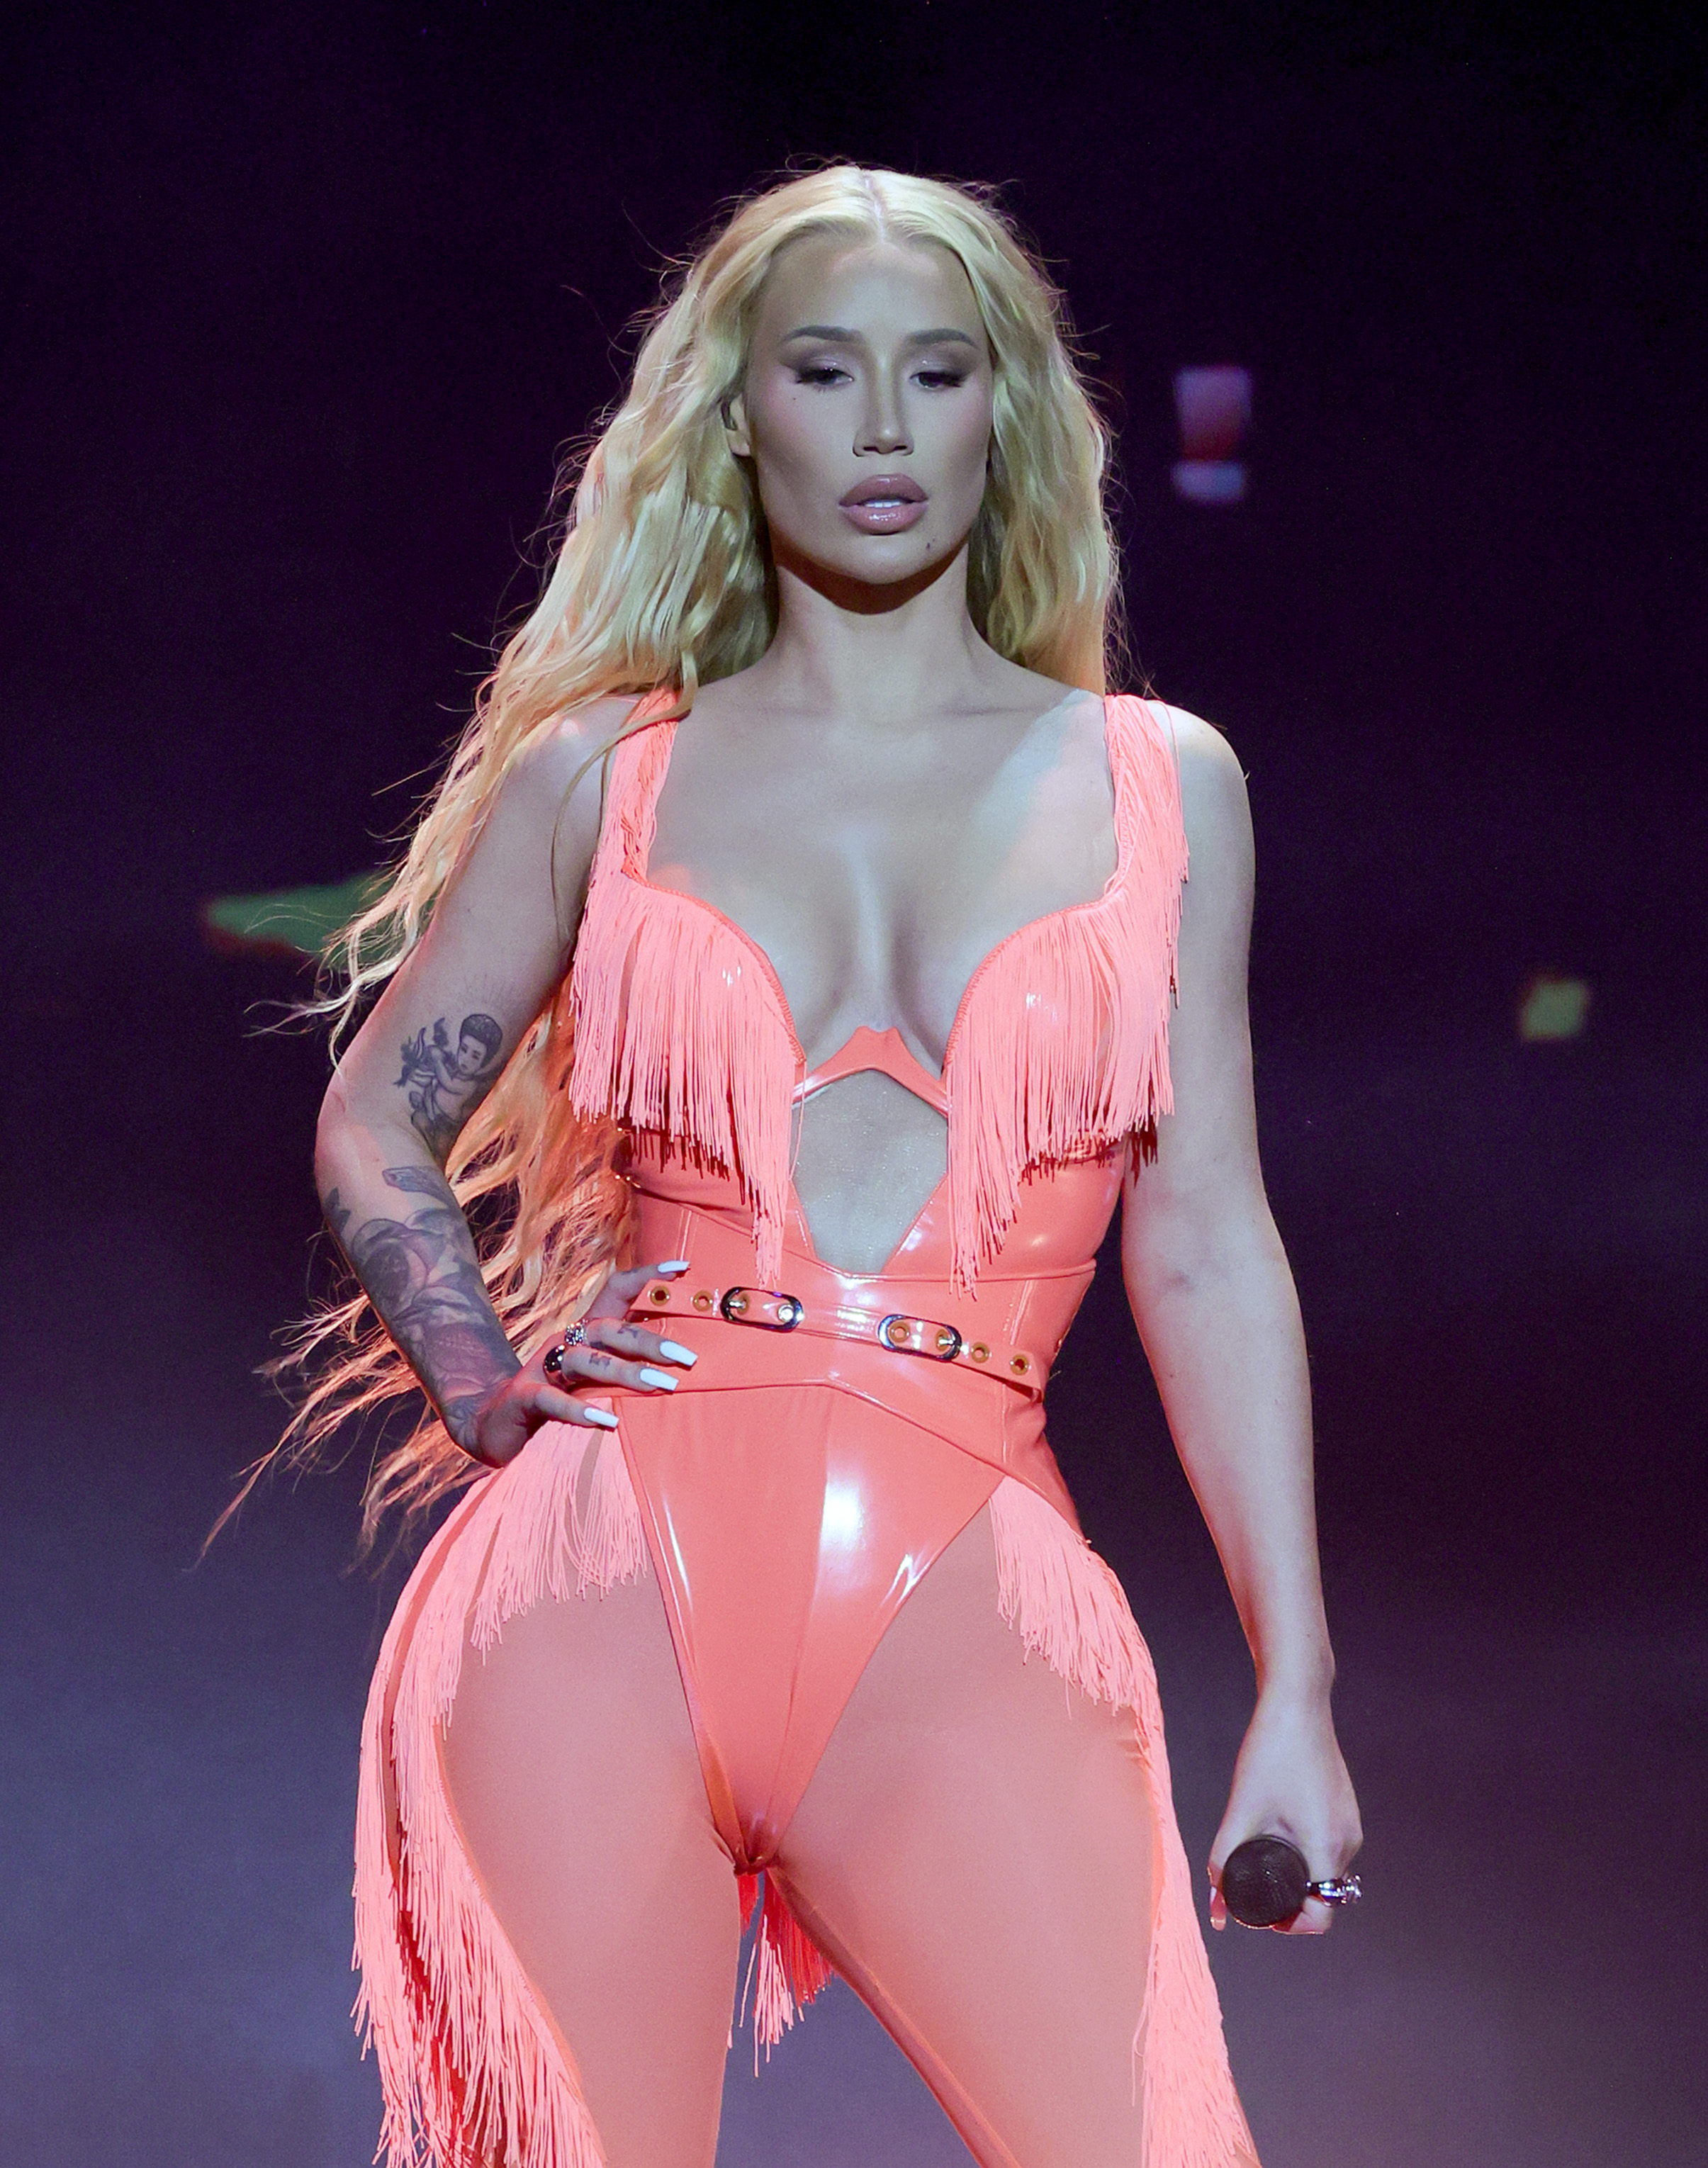 Iggy Azalea dumped Young after reviewing CCTV footage at their home and discovering he was cheating